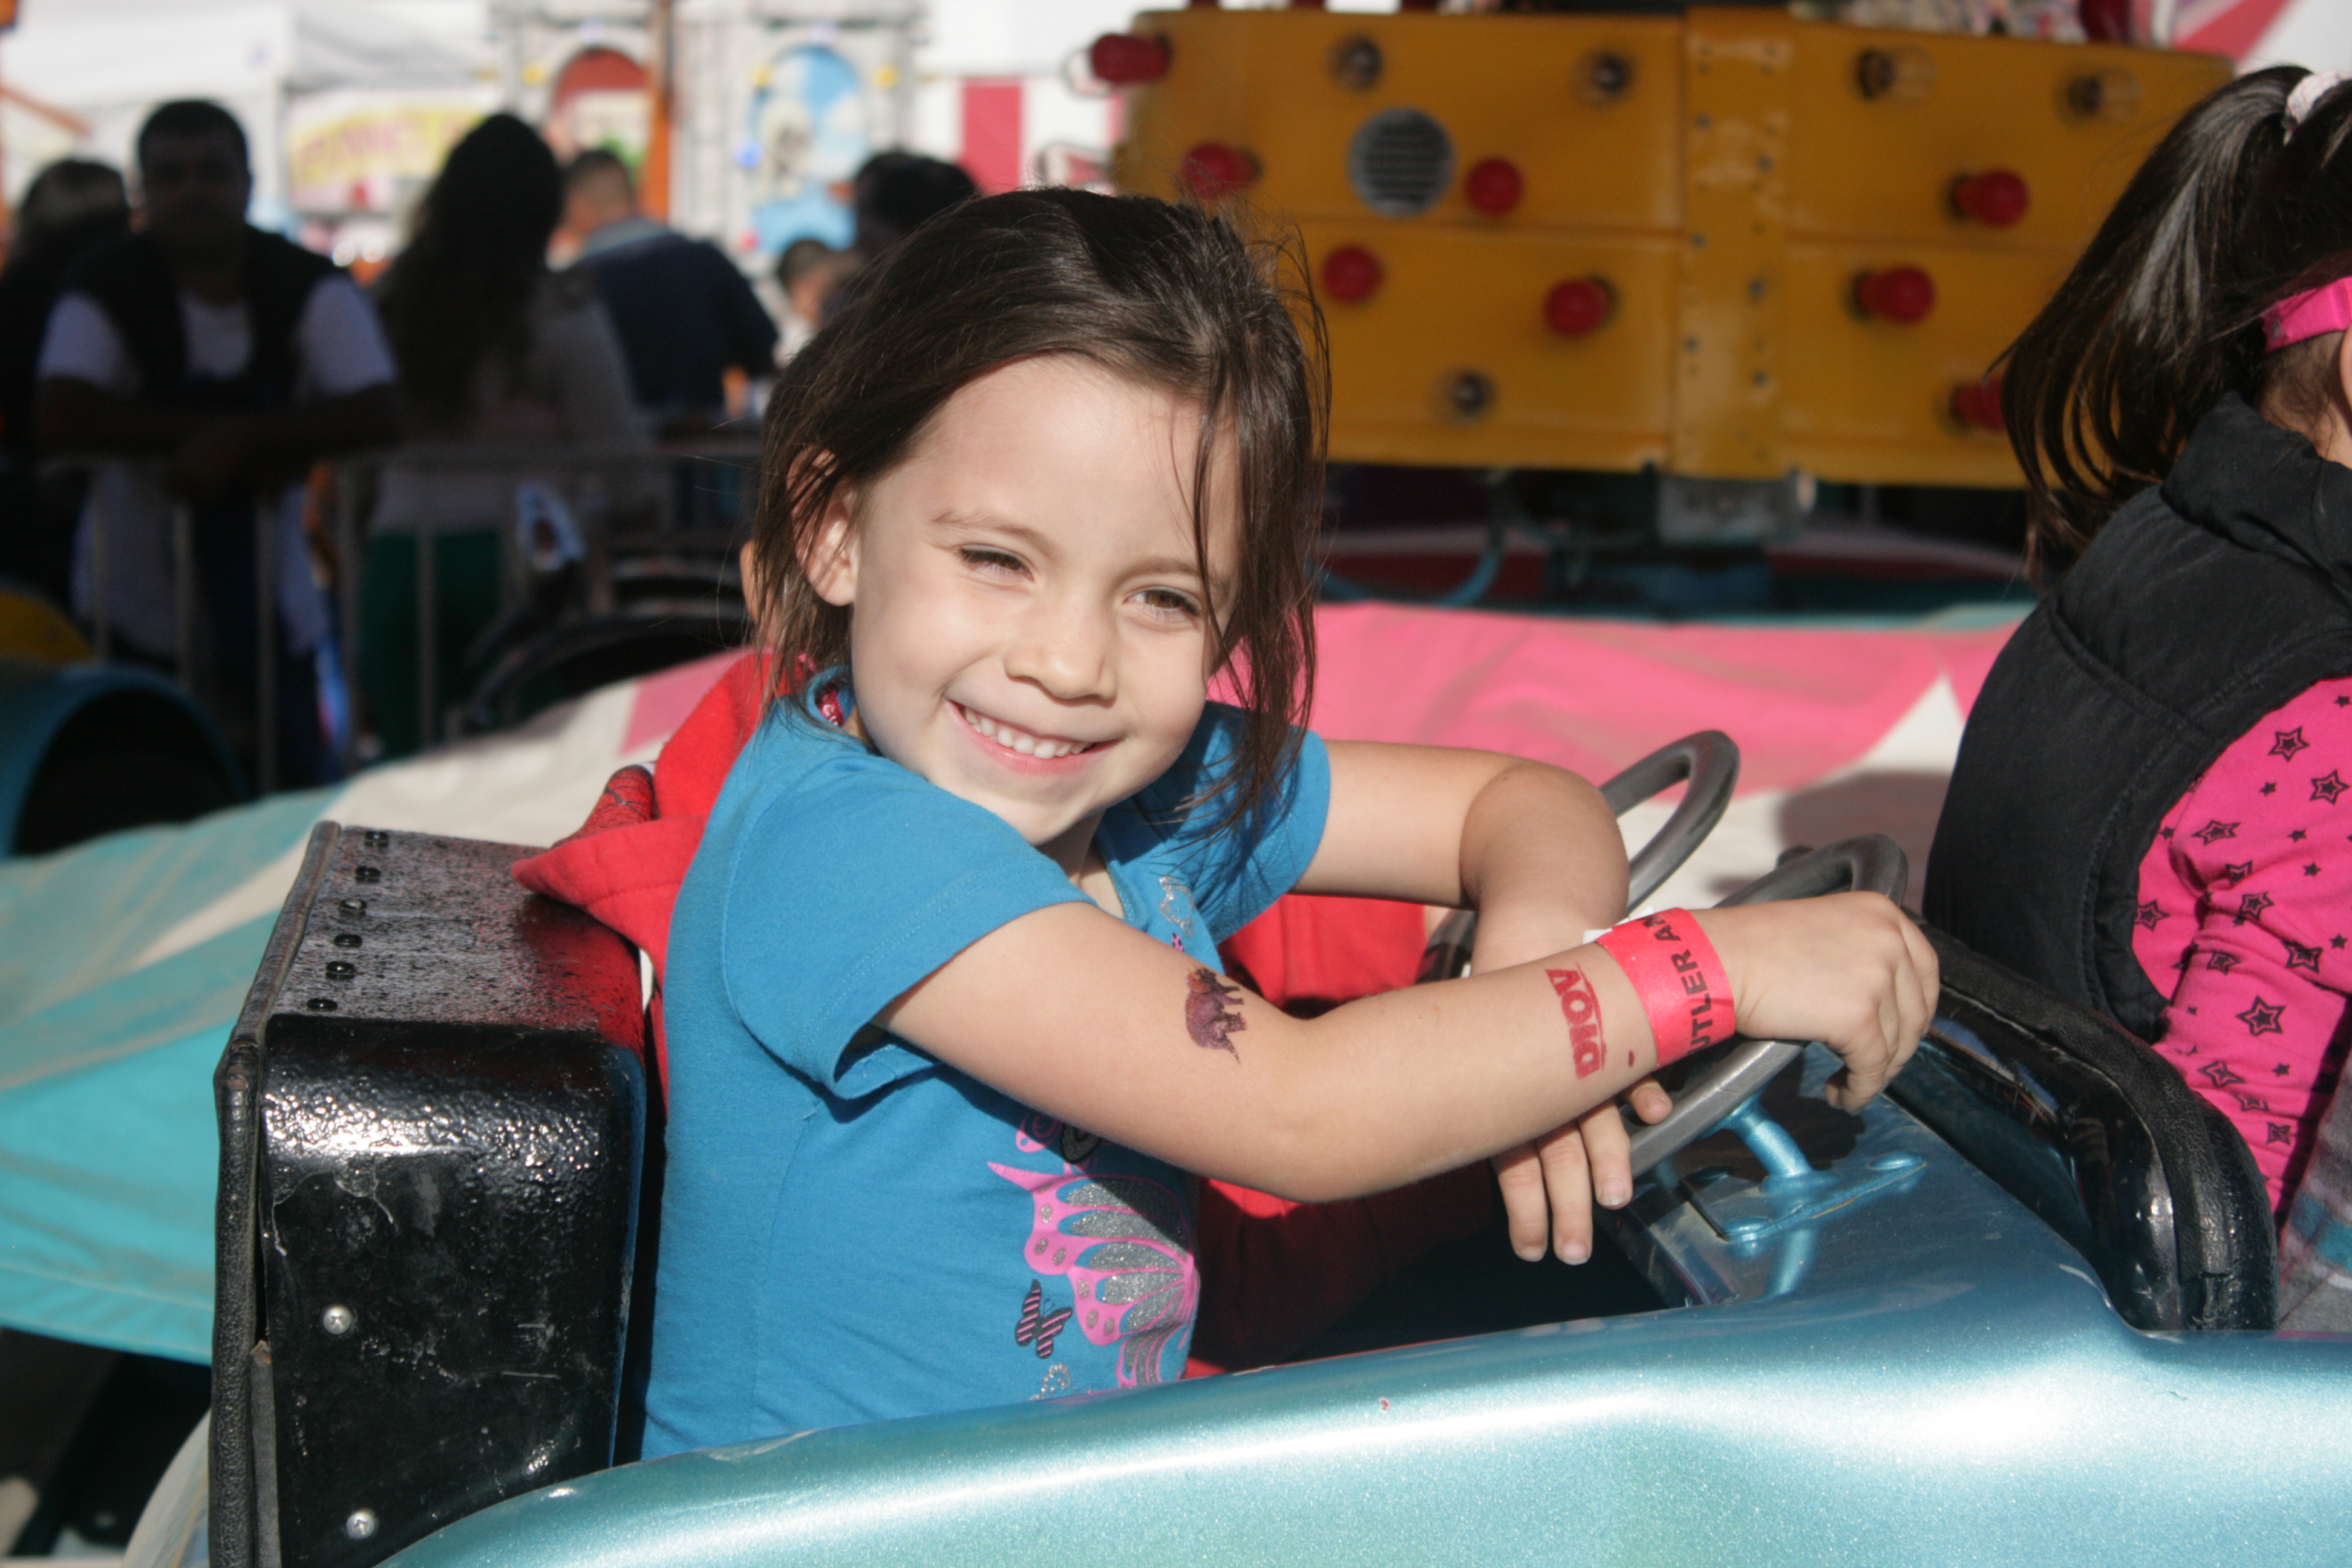 No free time here, a mom must "Keep Moooving". And keep moving I did at the fair with my daughter. -Sarah Villalobos